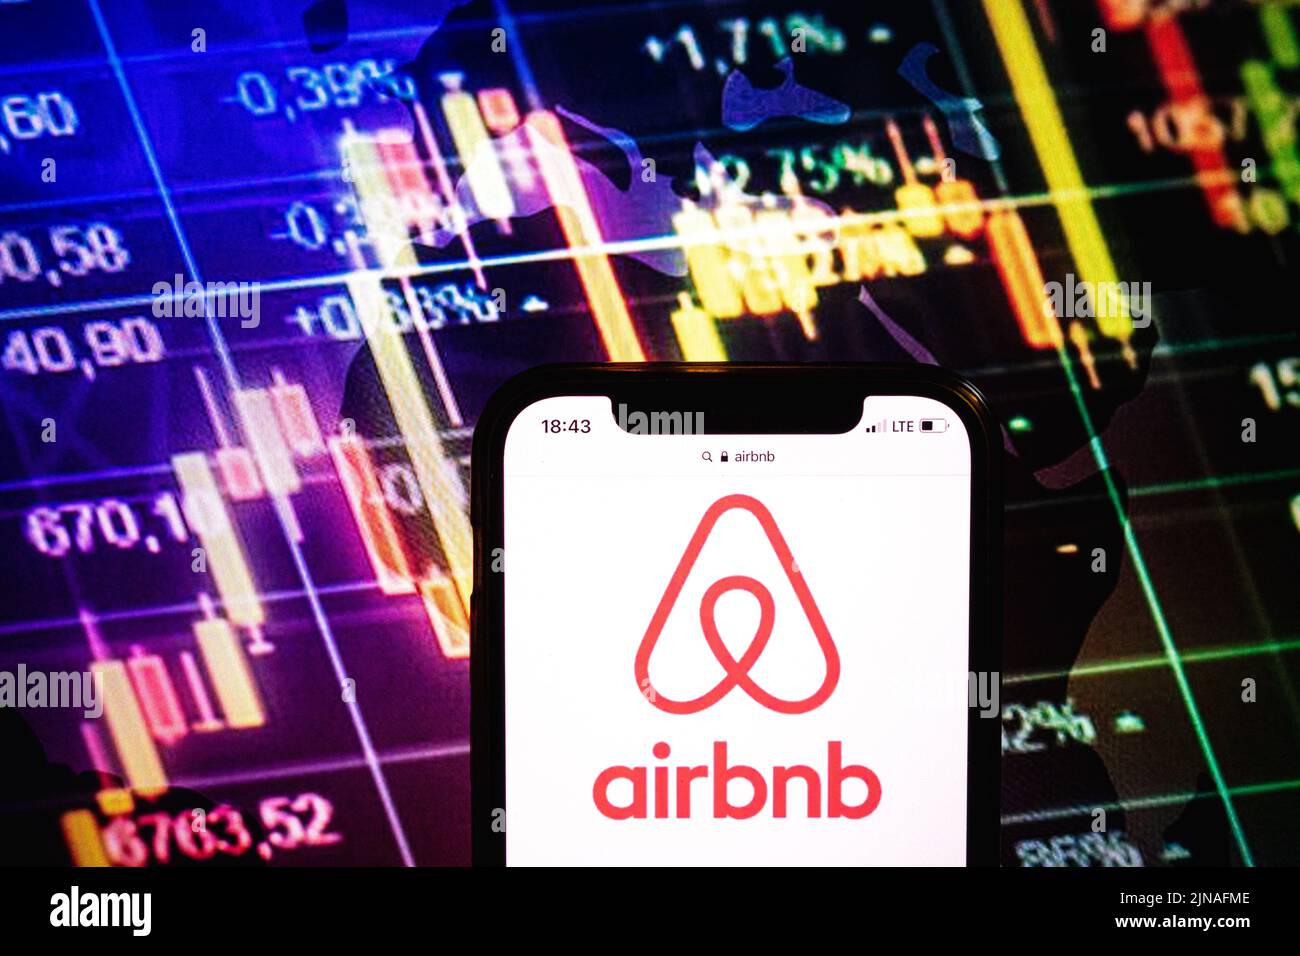 KONSKIE, POLAND - August 09, 2022: Smartphone displaying logo of Airbnb company on stock exchange diagram background Stock Photo